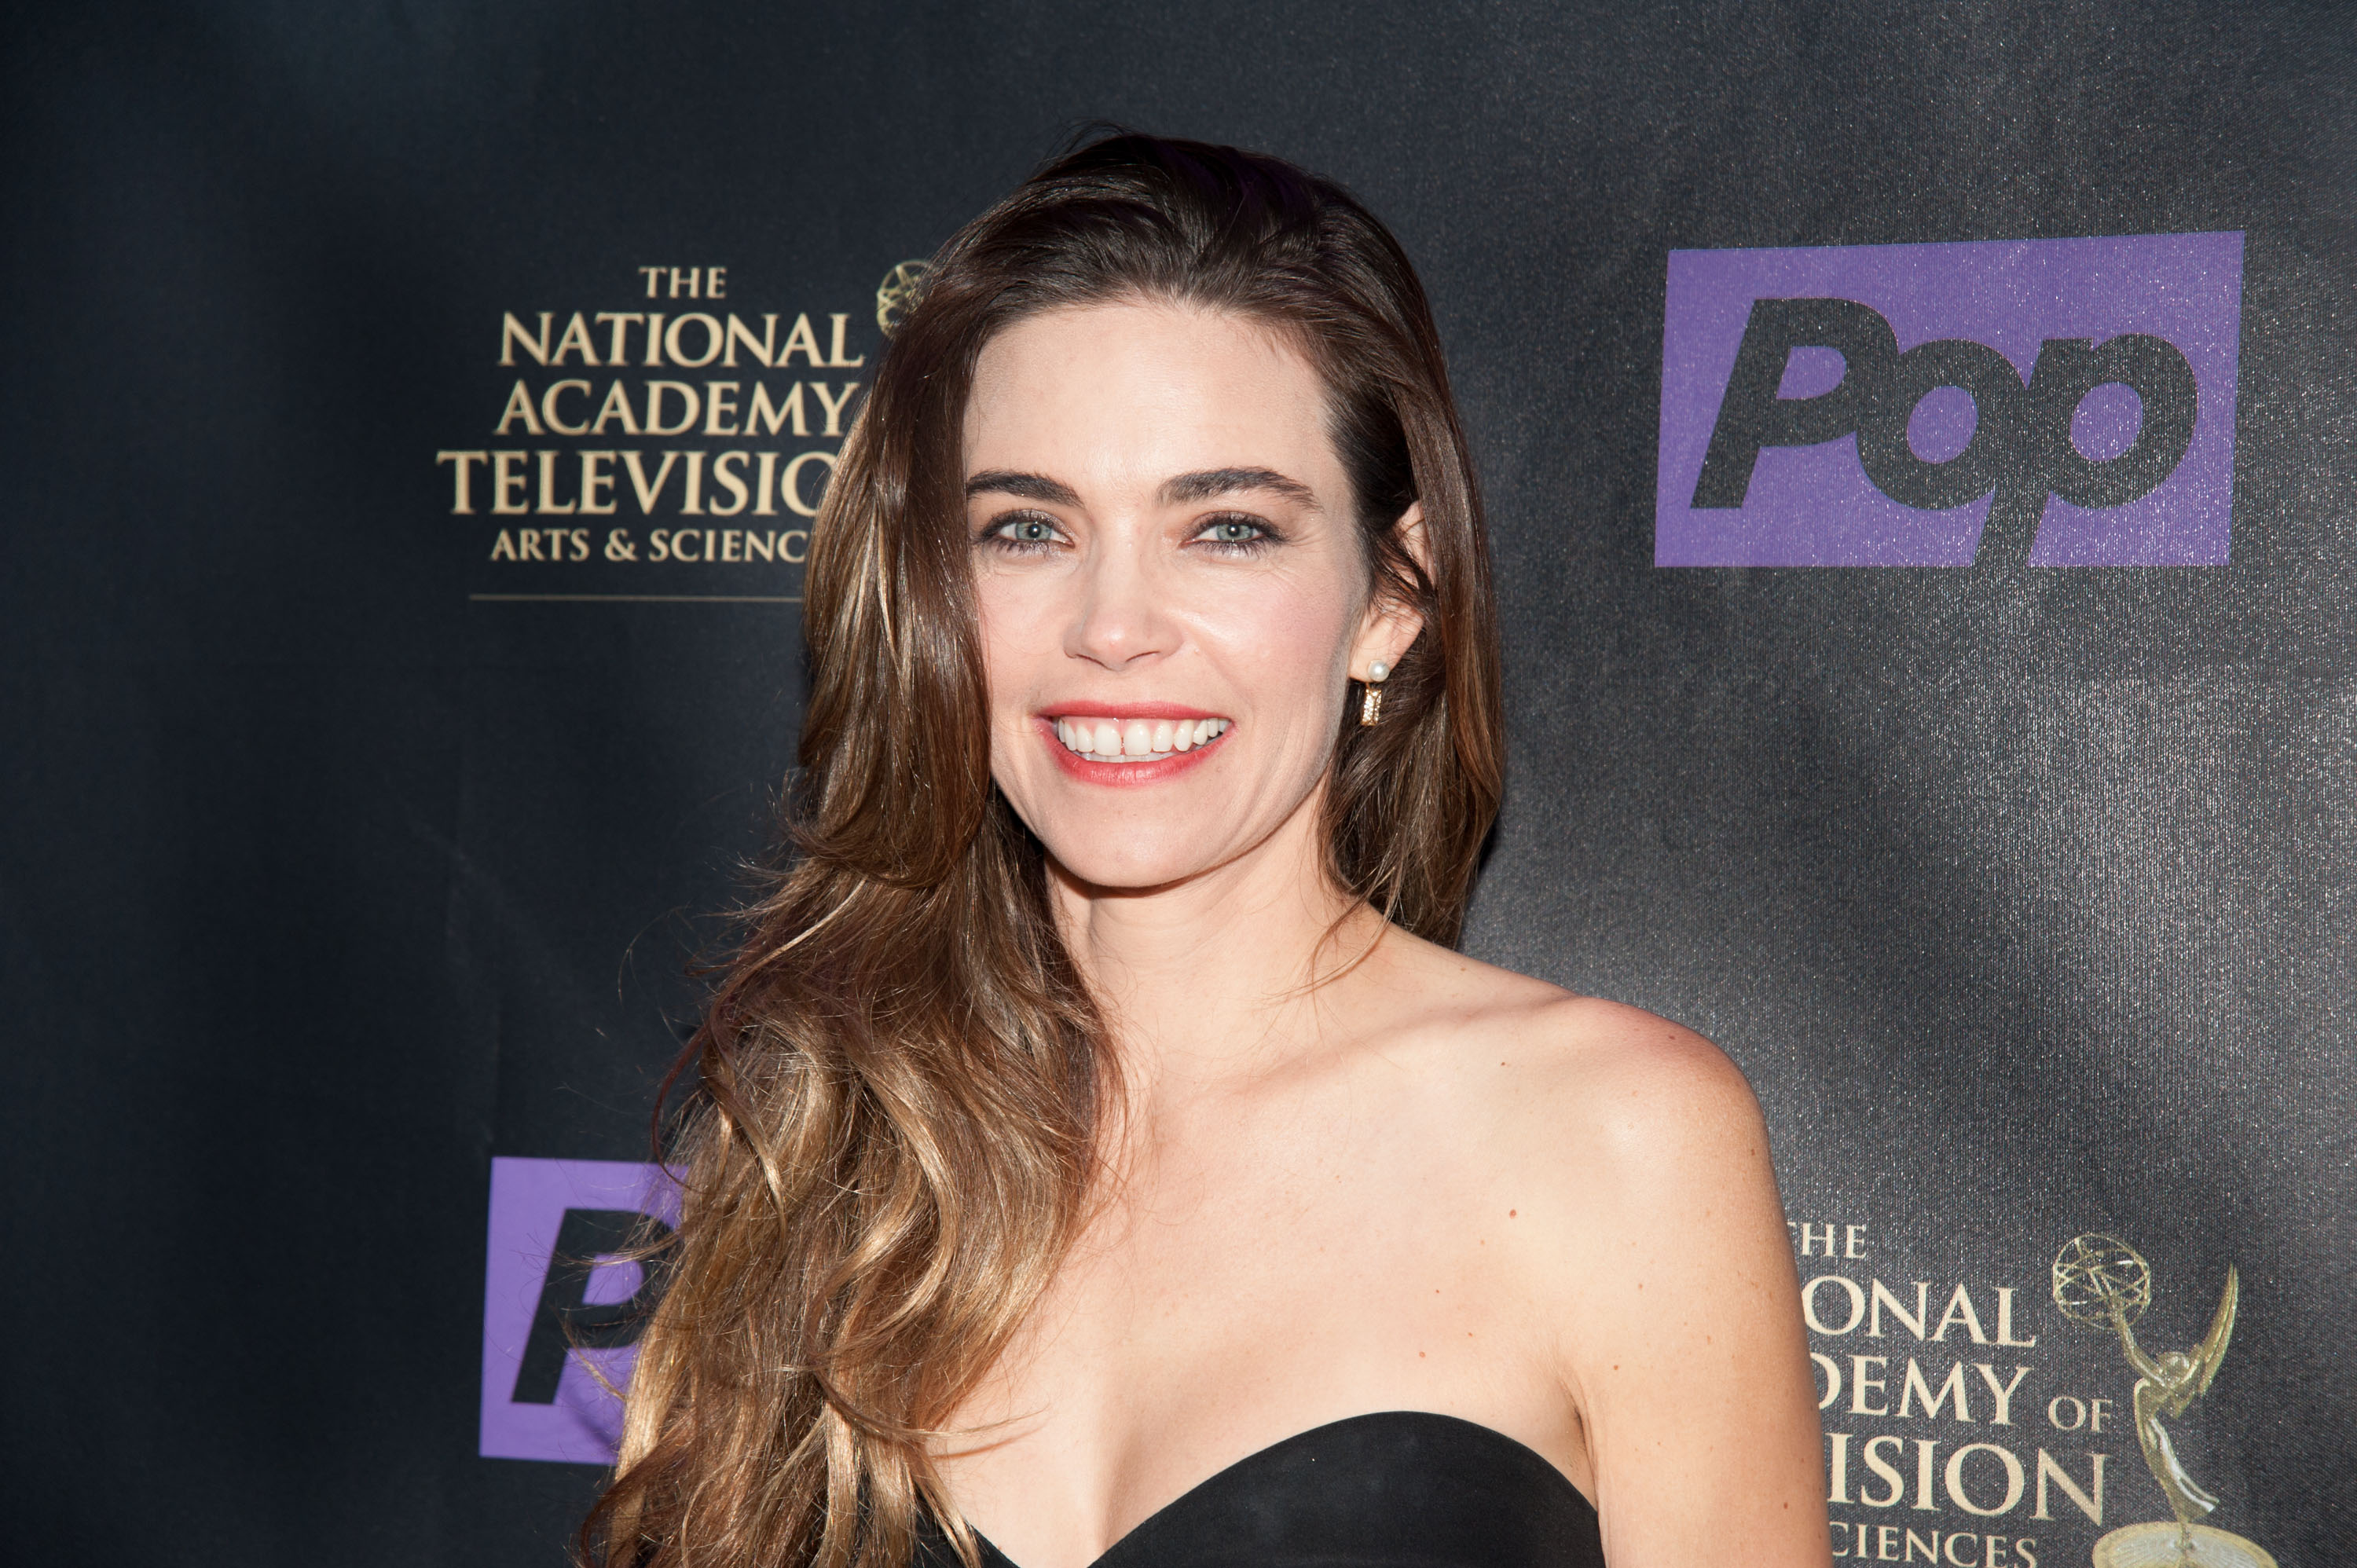 'The Young and the Restless' actor Amelia Heinle wearing a black strapless dress.